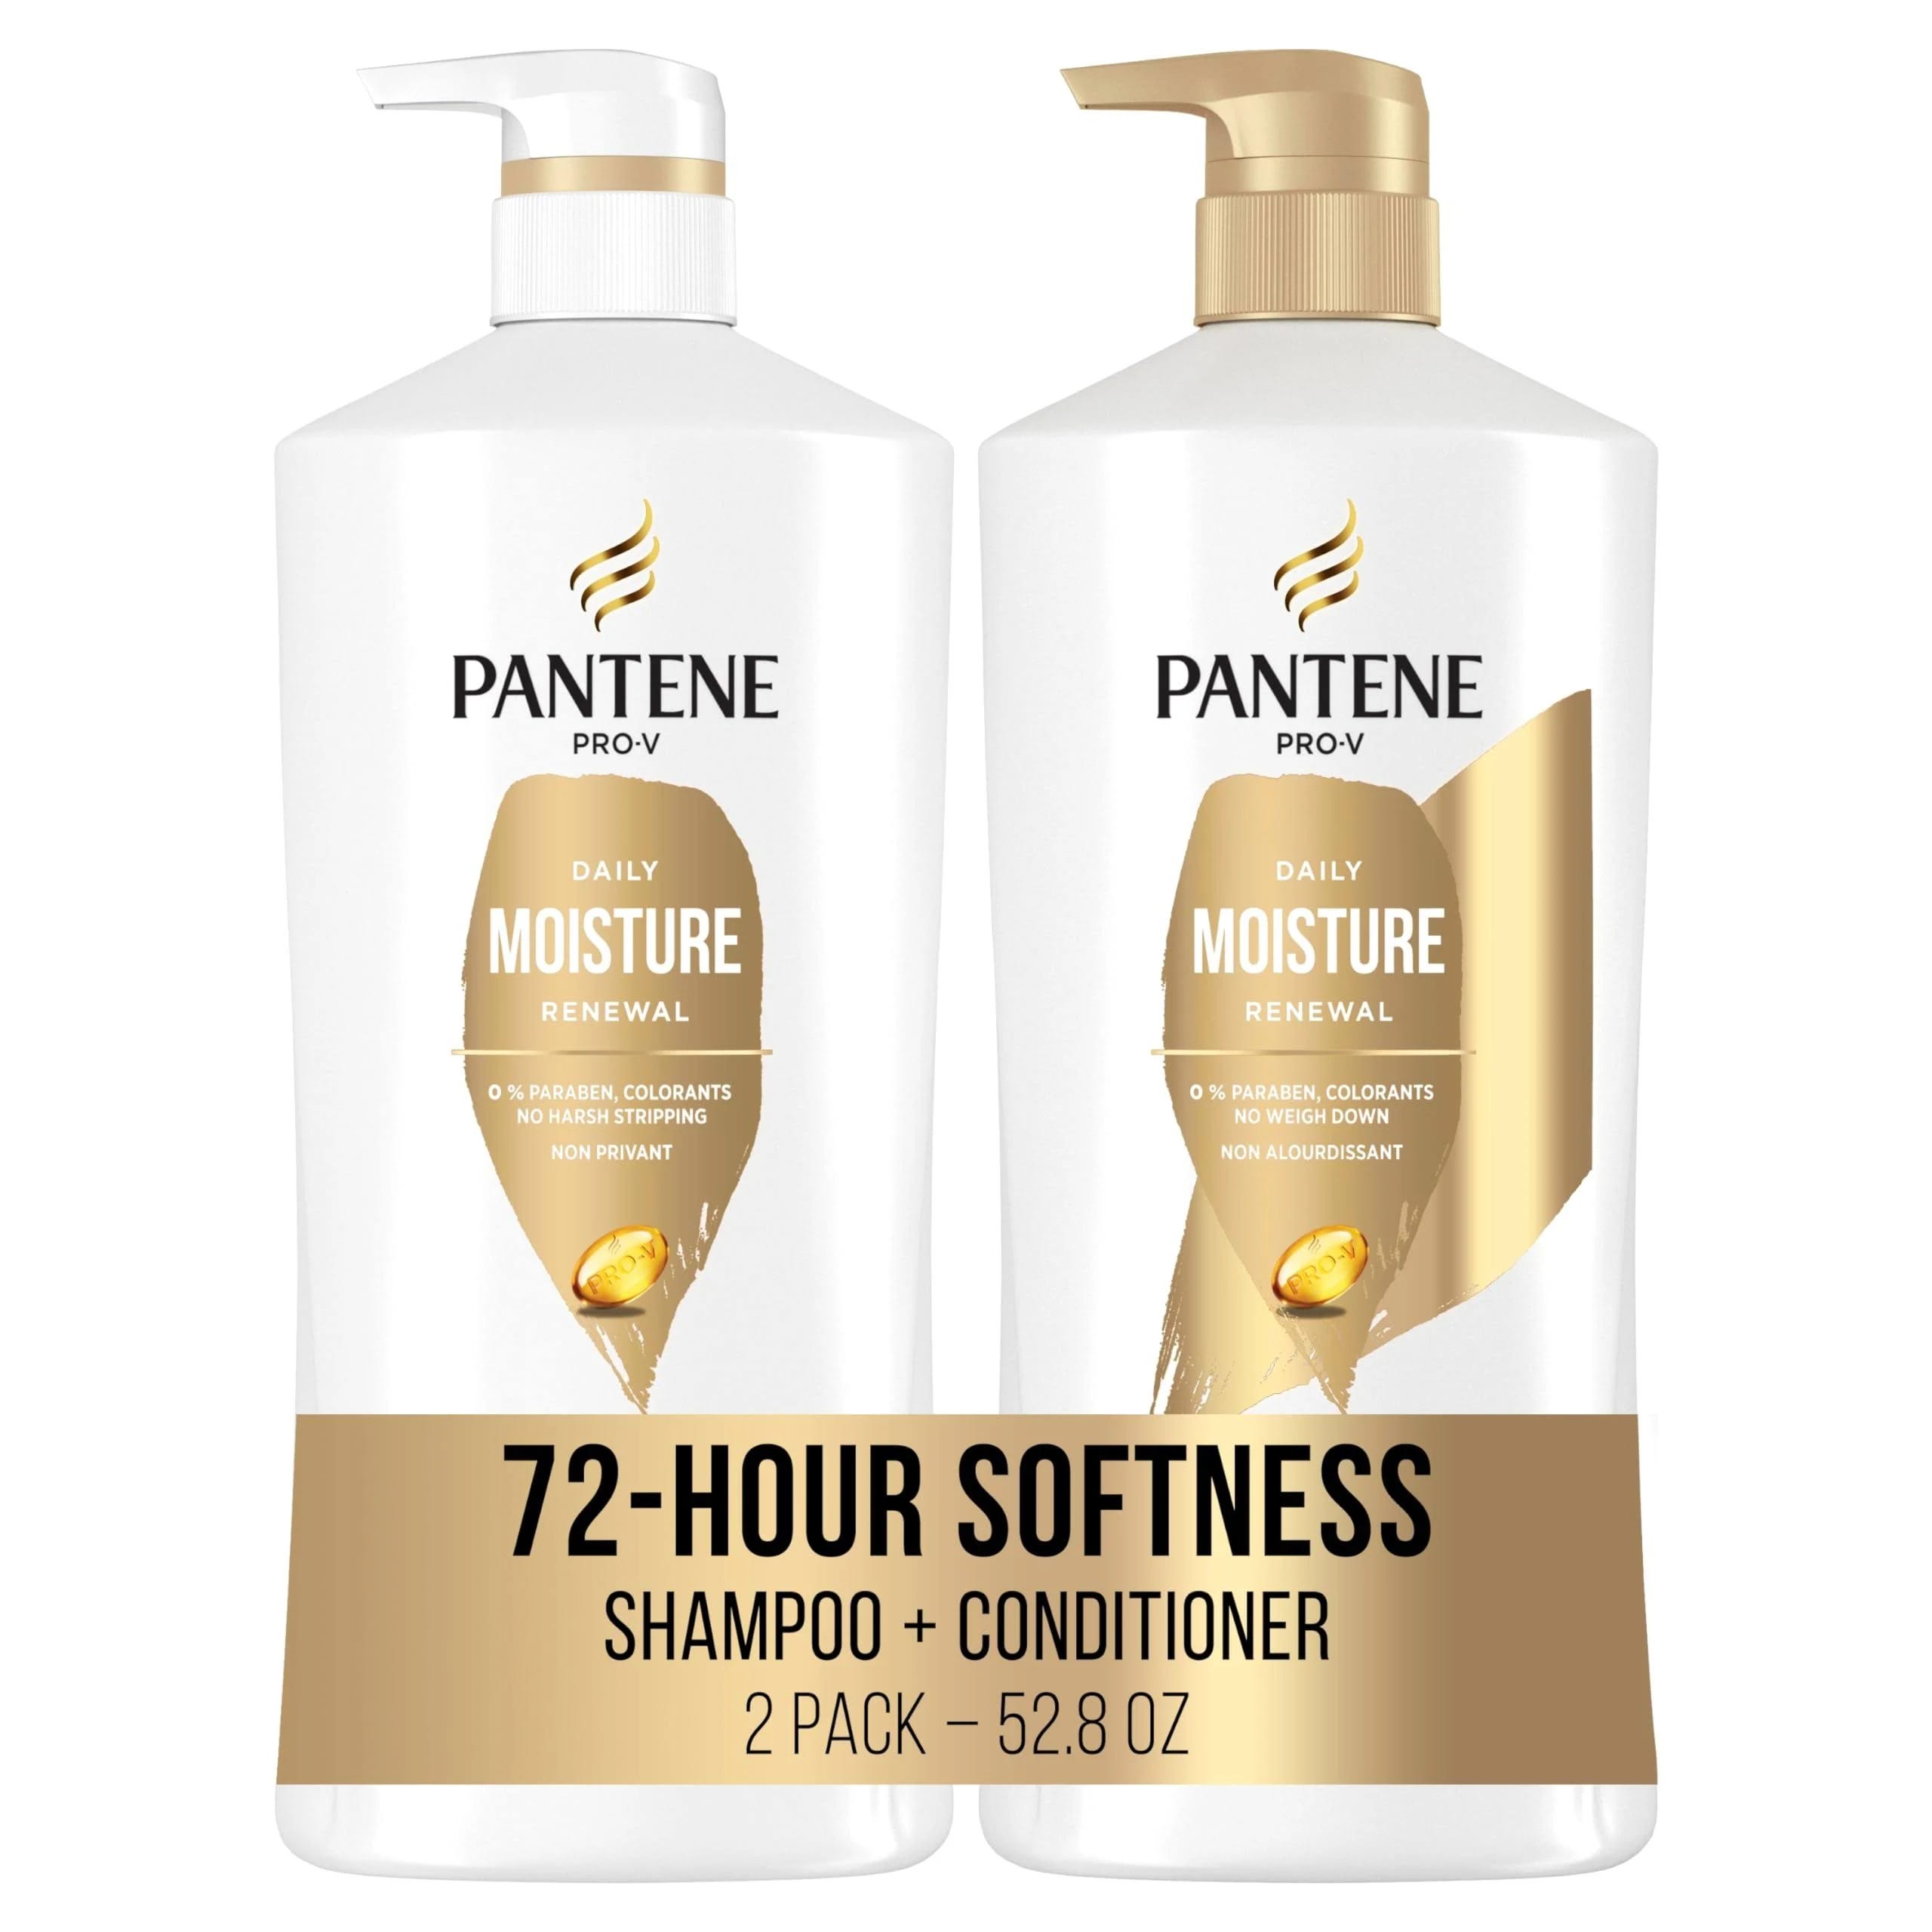 Pantene Color Safe Shampoo and Treatment Set for Dry Hair | Image